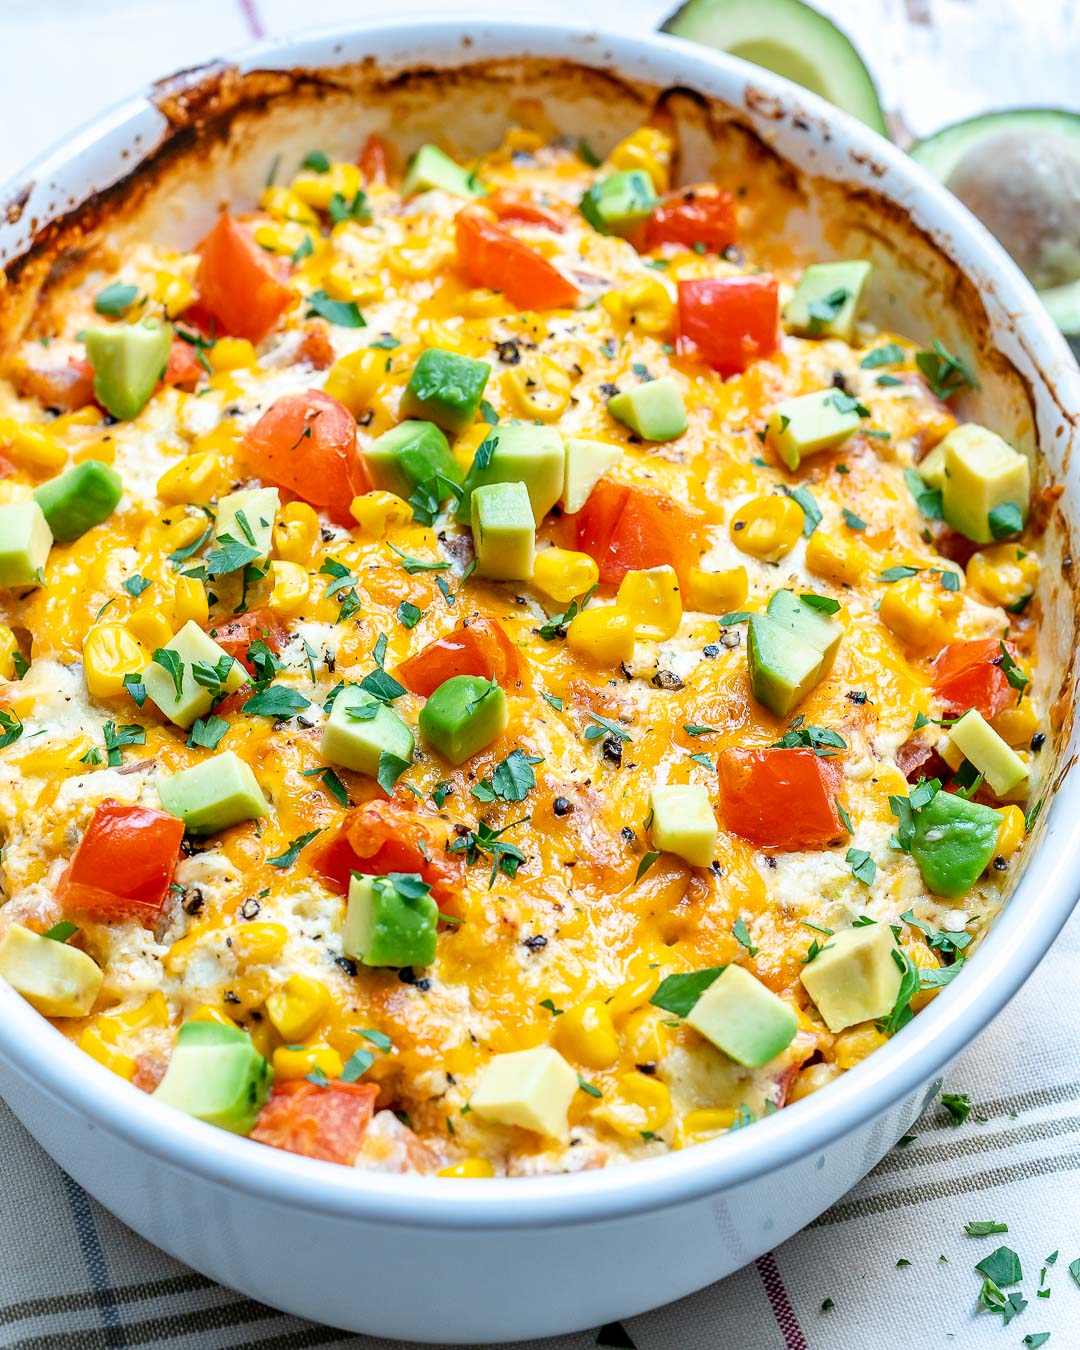 Creamy Green Chile Loaded Chicken Bake for Clean Eating Comfort Food!